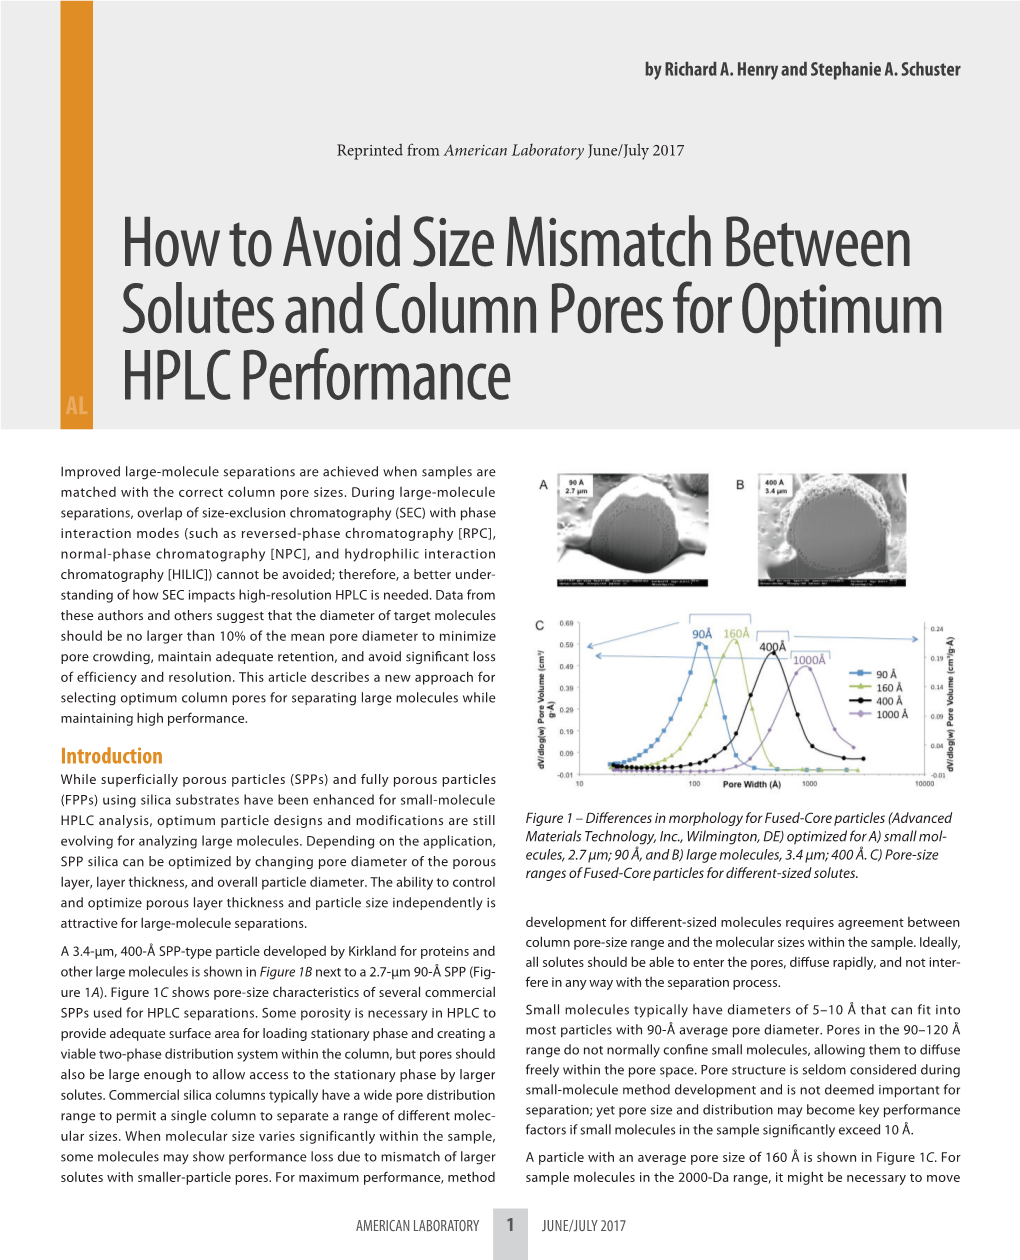 How to Avoid Size Mismatch Between Solutes and Column Pores for Optimum